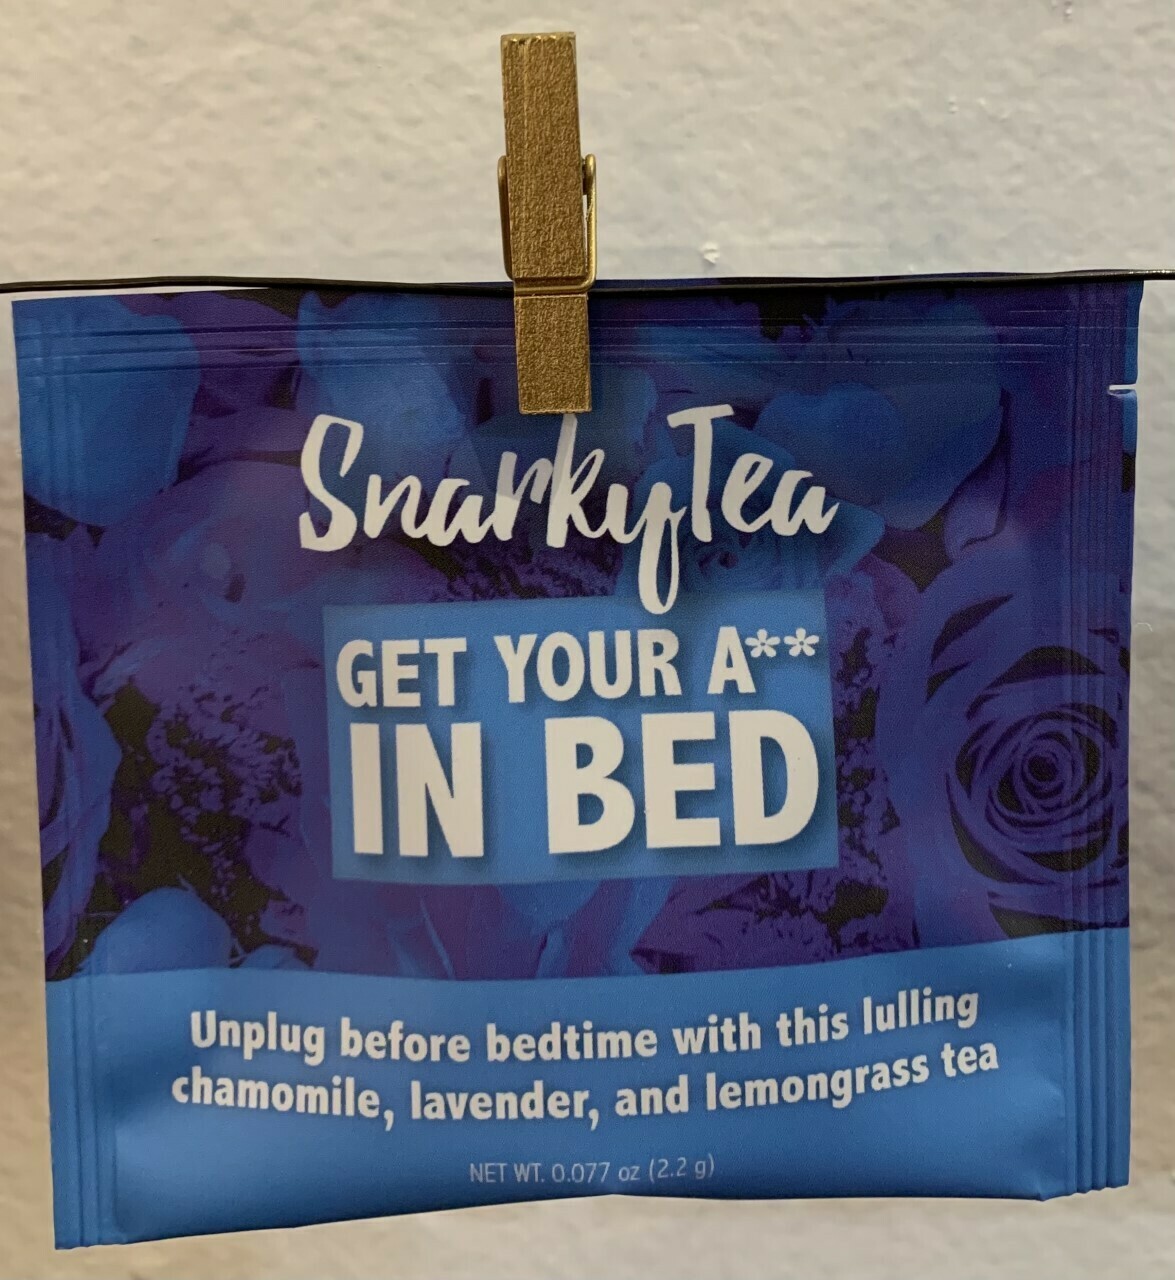 Get Your a$$ in Bed tea (Chamomile, Lavender and Lemomgrass tea)